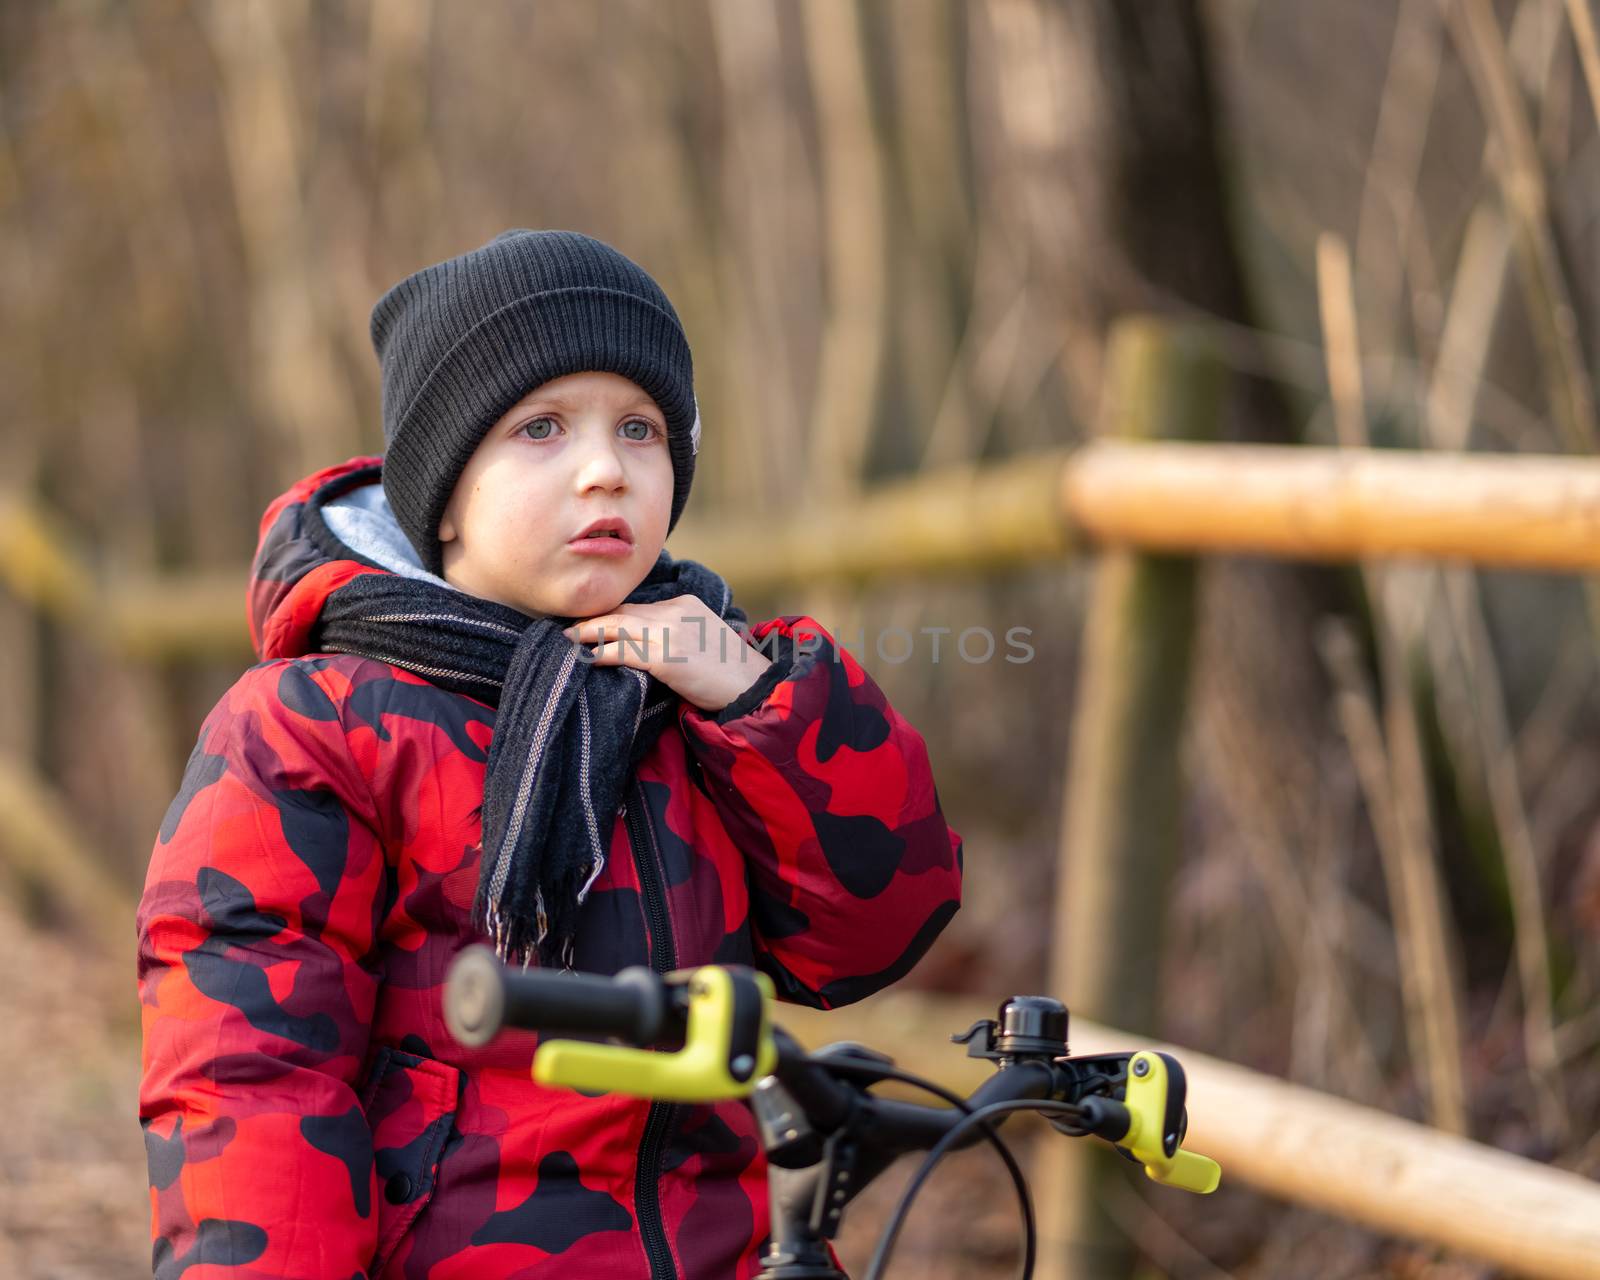 Angry boy on bicycle at park by Robertobinetti70